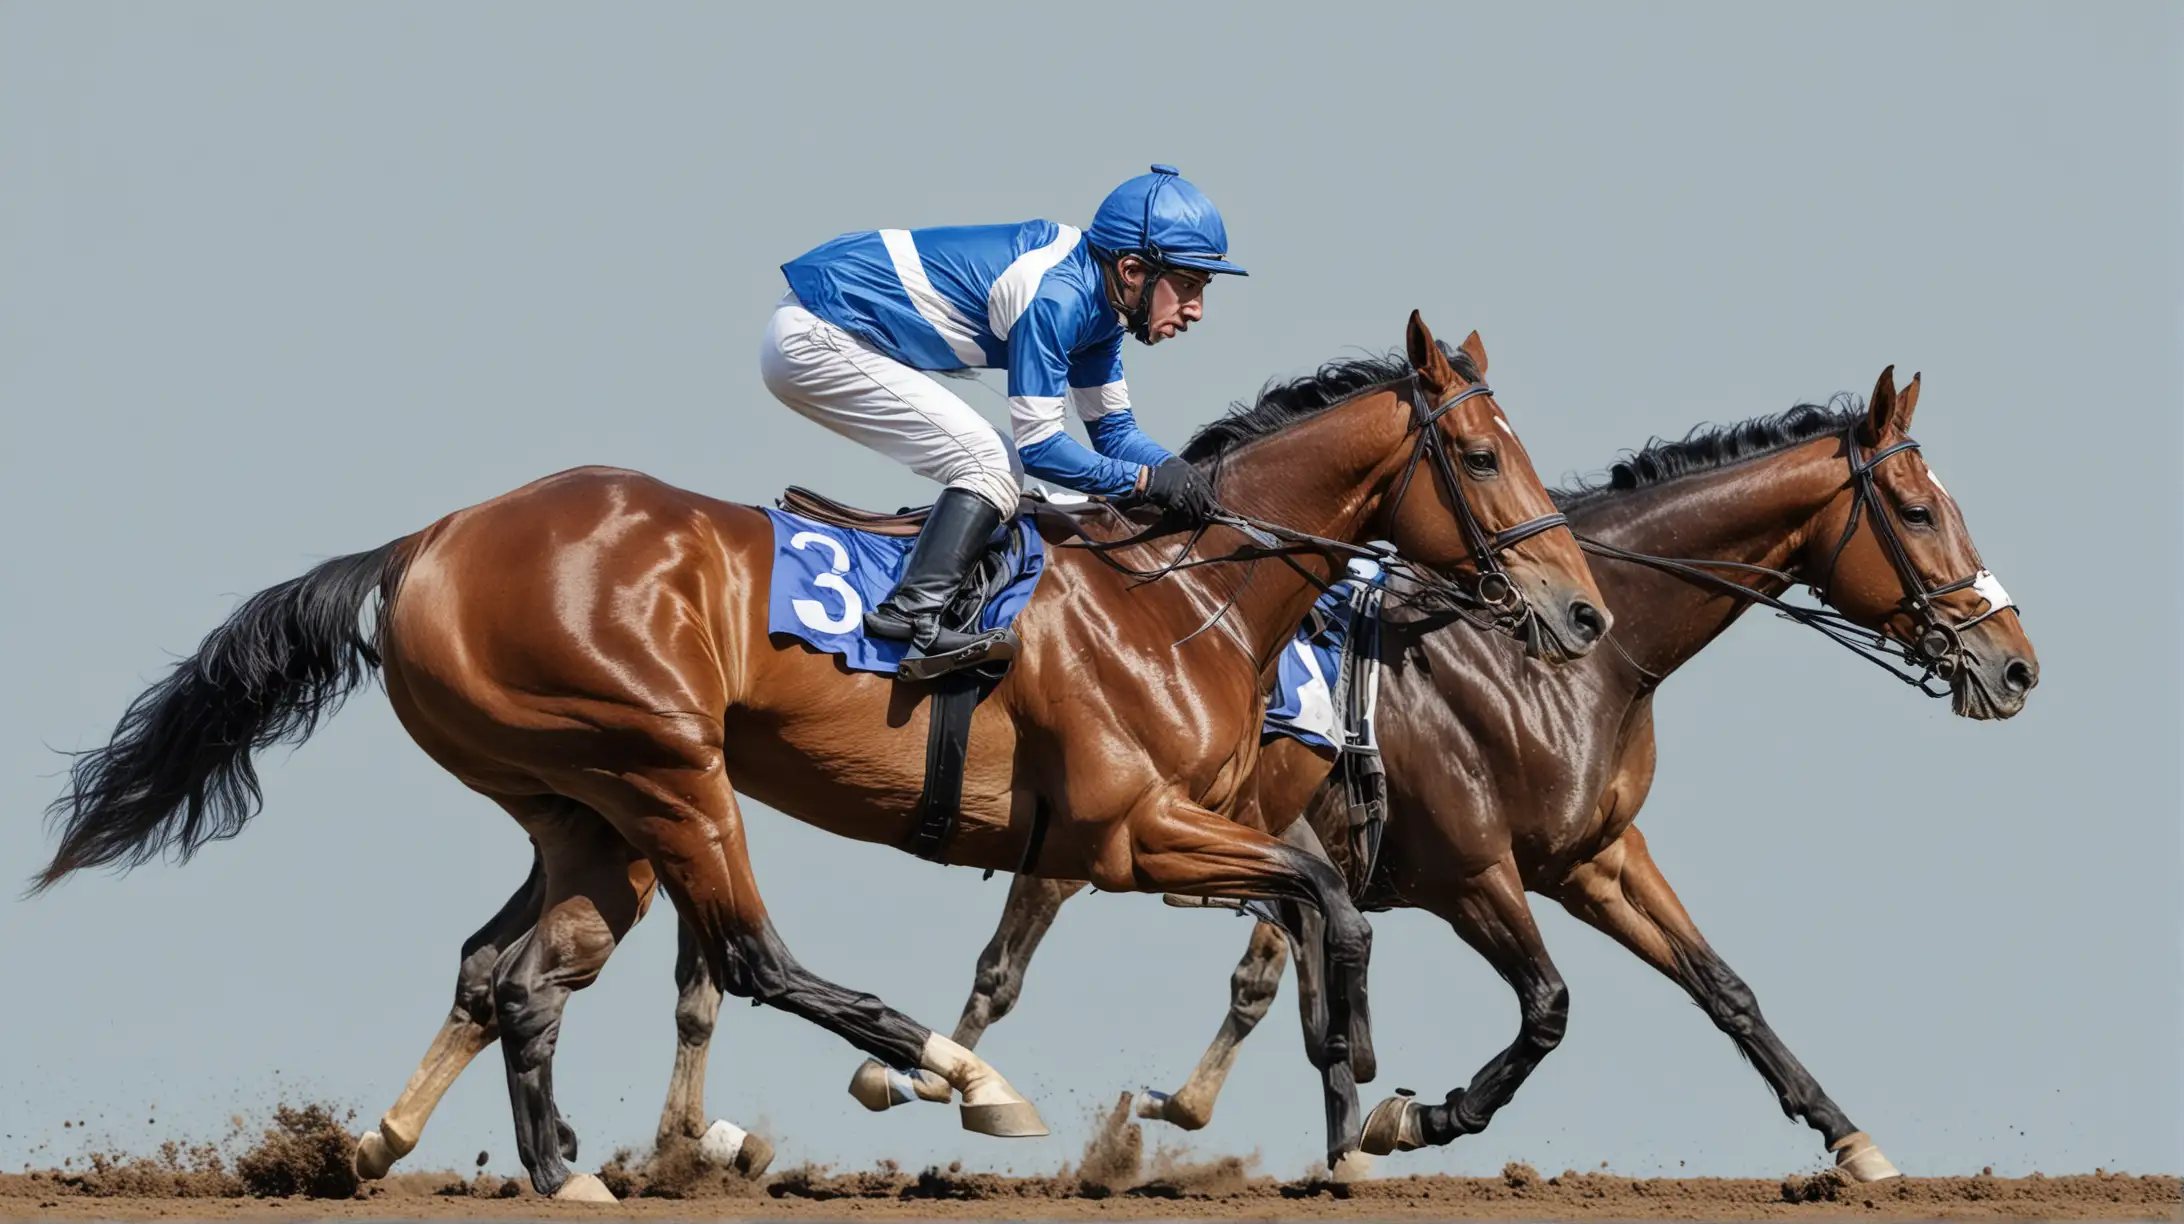 Racehorse and Jockey in Blue Jersey on White Background